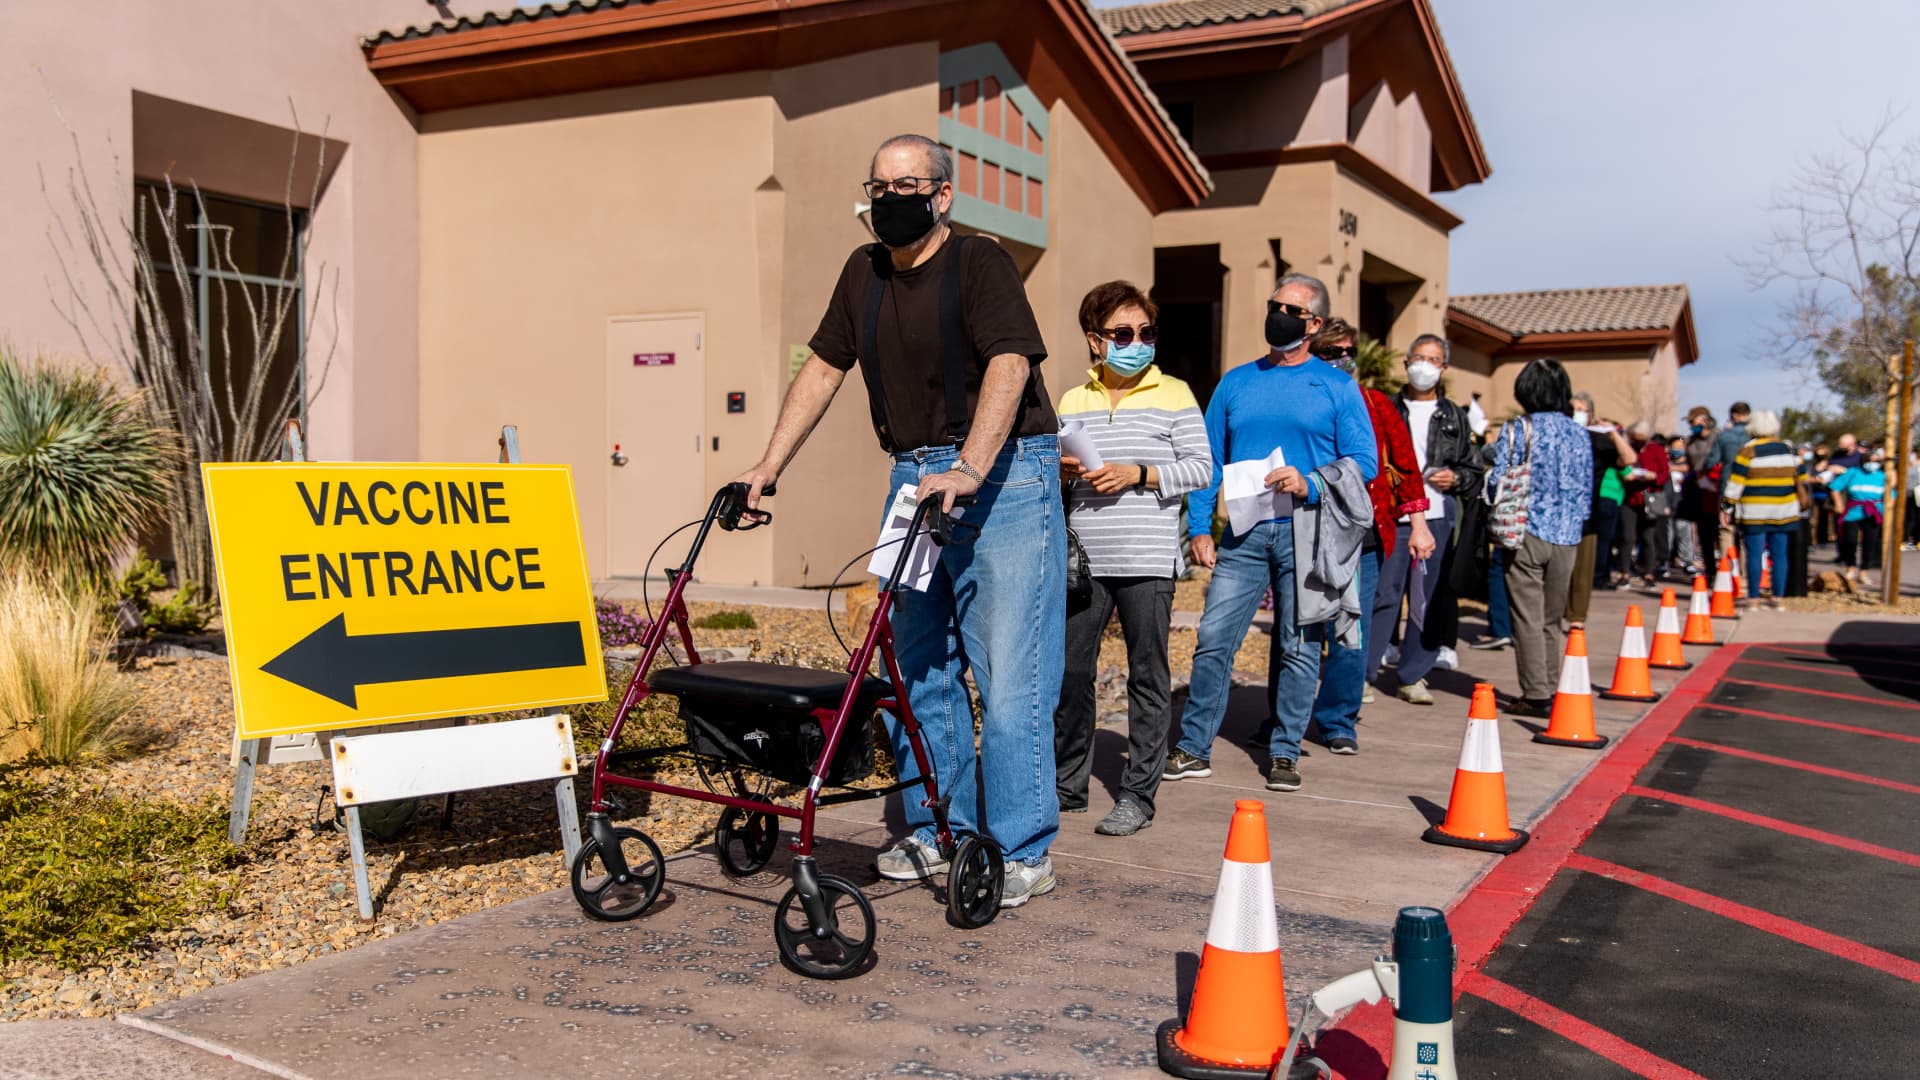 People without appointments stand in line to possibly receive a dose of the Pfizer-BioNTech Covid-19 vaccine after all appointments have been administered at the Sun City Anthem Community Center vaccination site in Henderson, Nevada, on Thursday, Feb. 11, 2021.